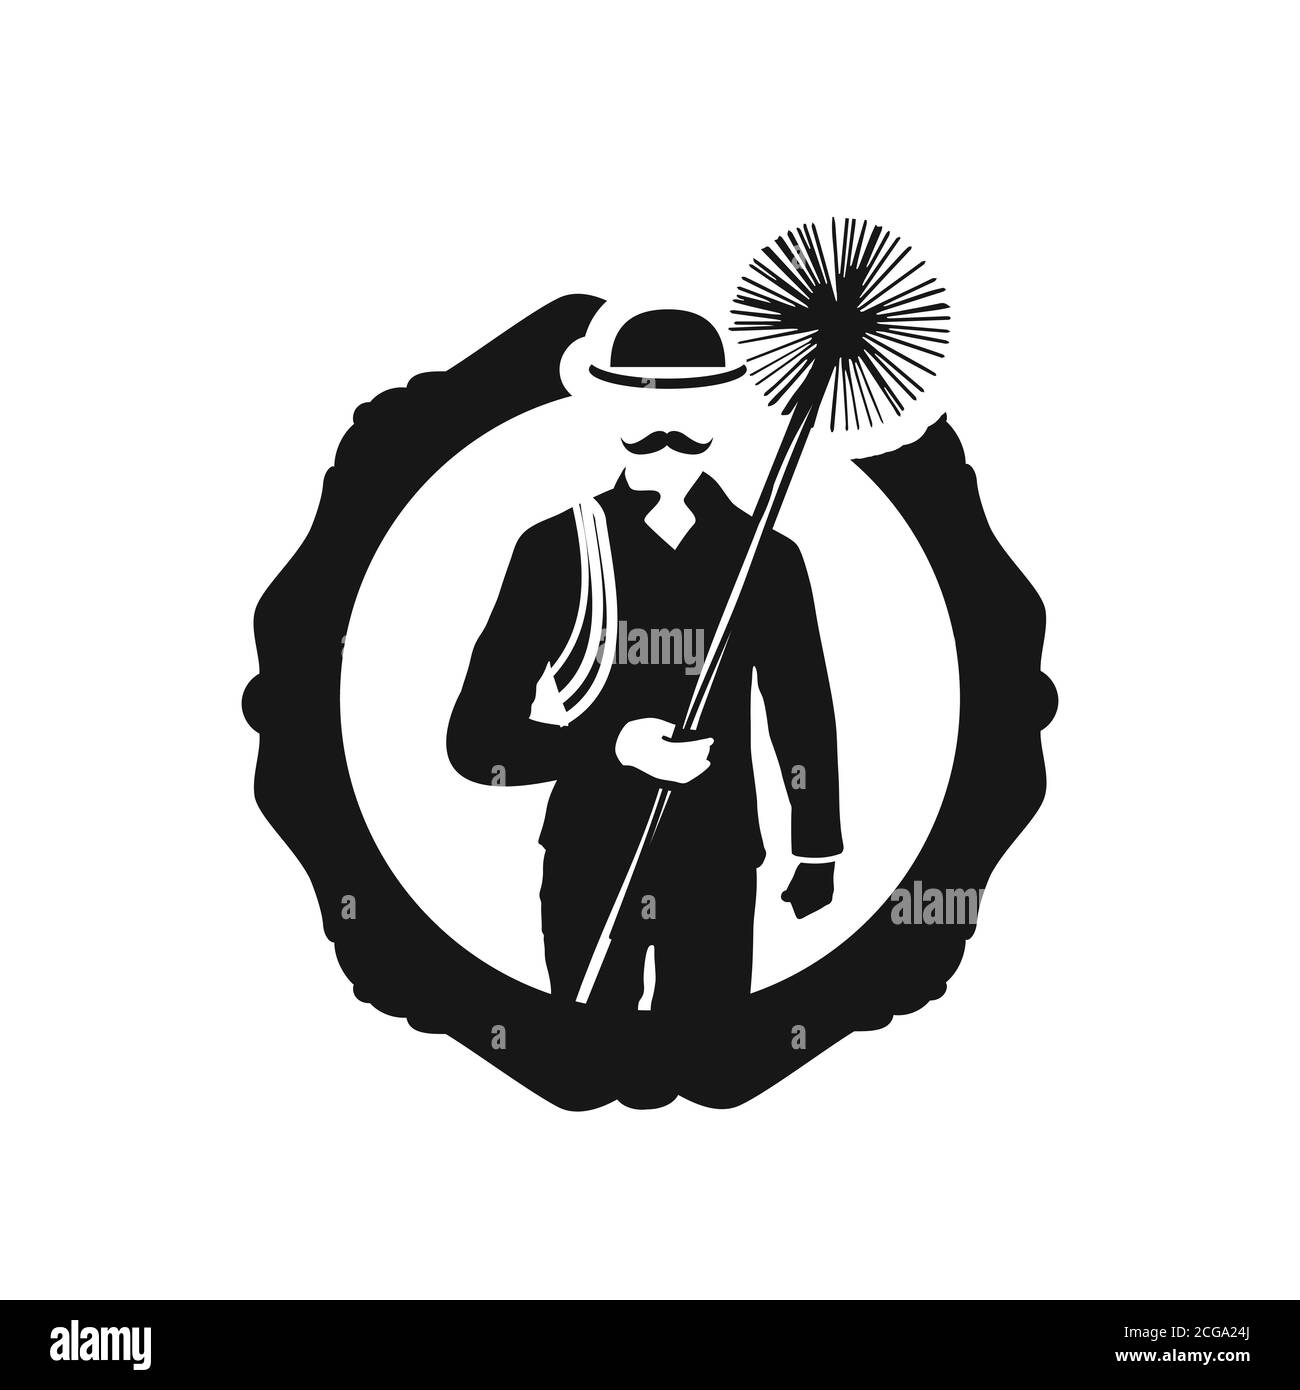 Chimney sweep with tool in uniform and chimney on the roof symbol. Retro style illustration of a chimney sweeper symbol isolated white background. Vec Stock Vector